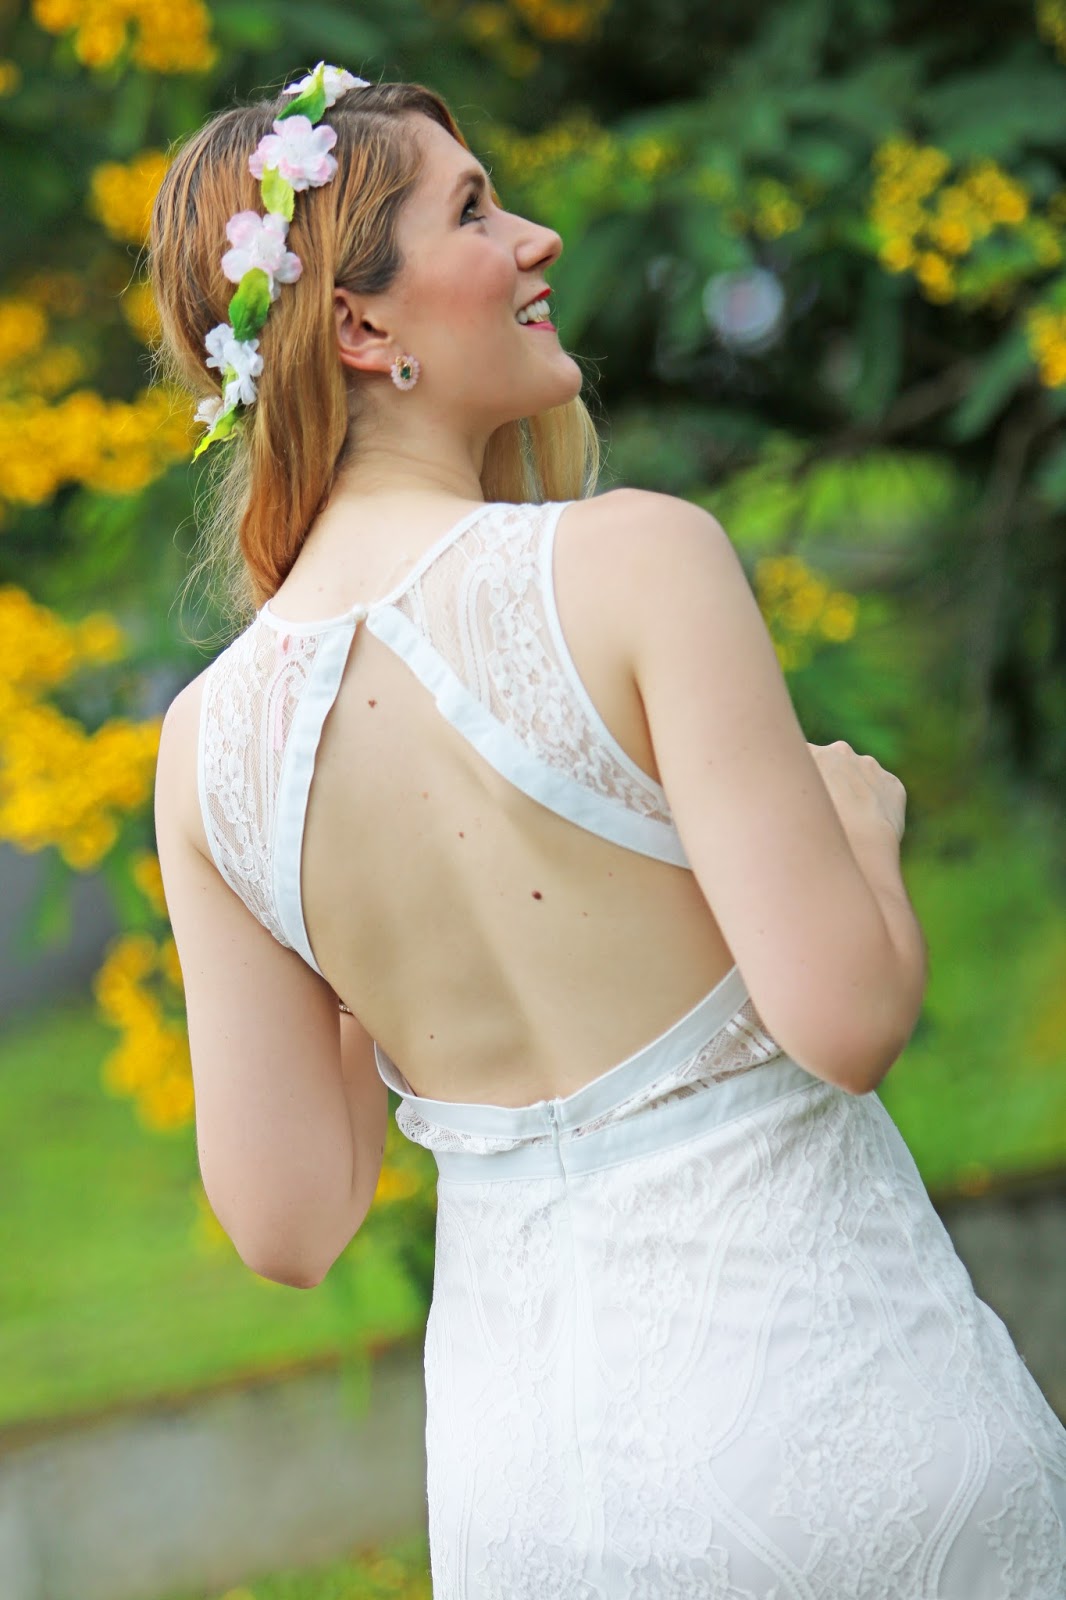 Pretty flower crown outfit